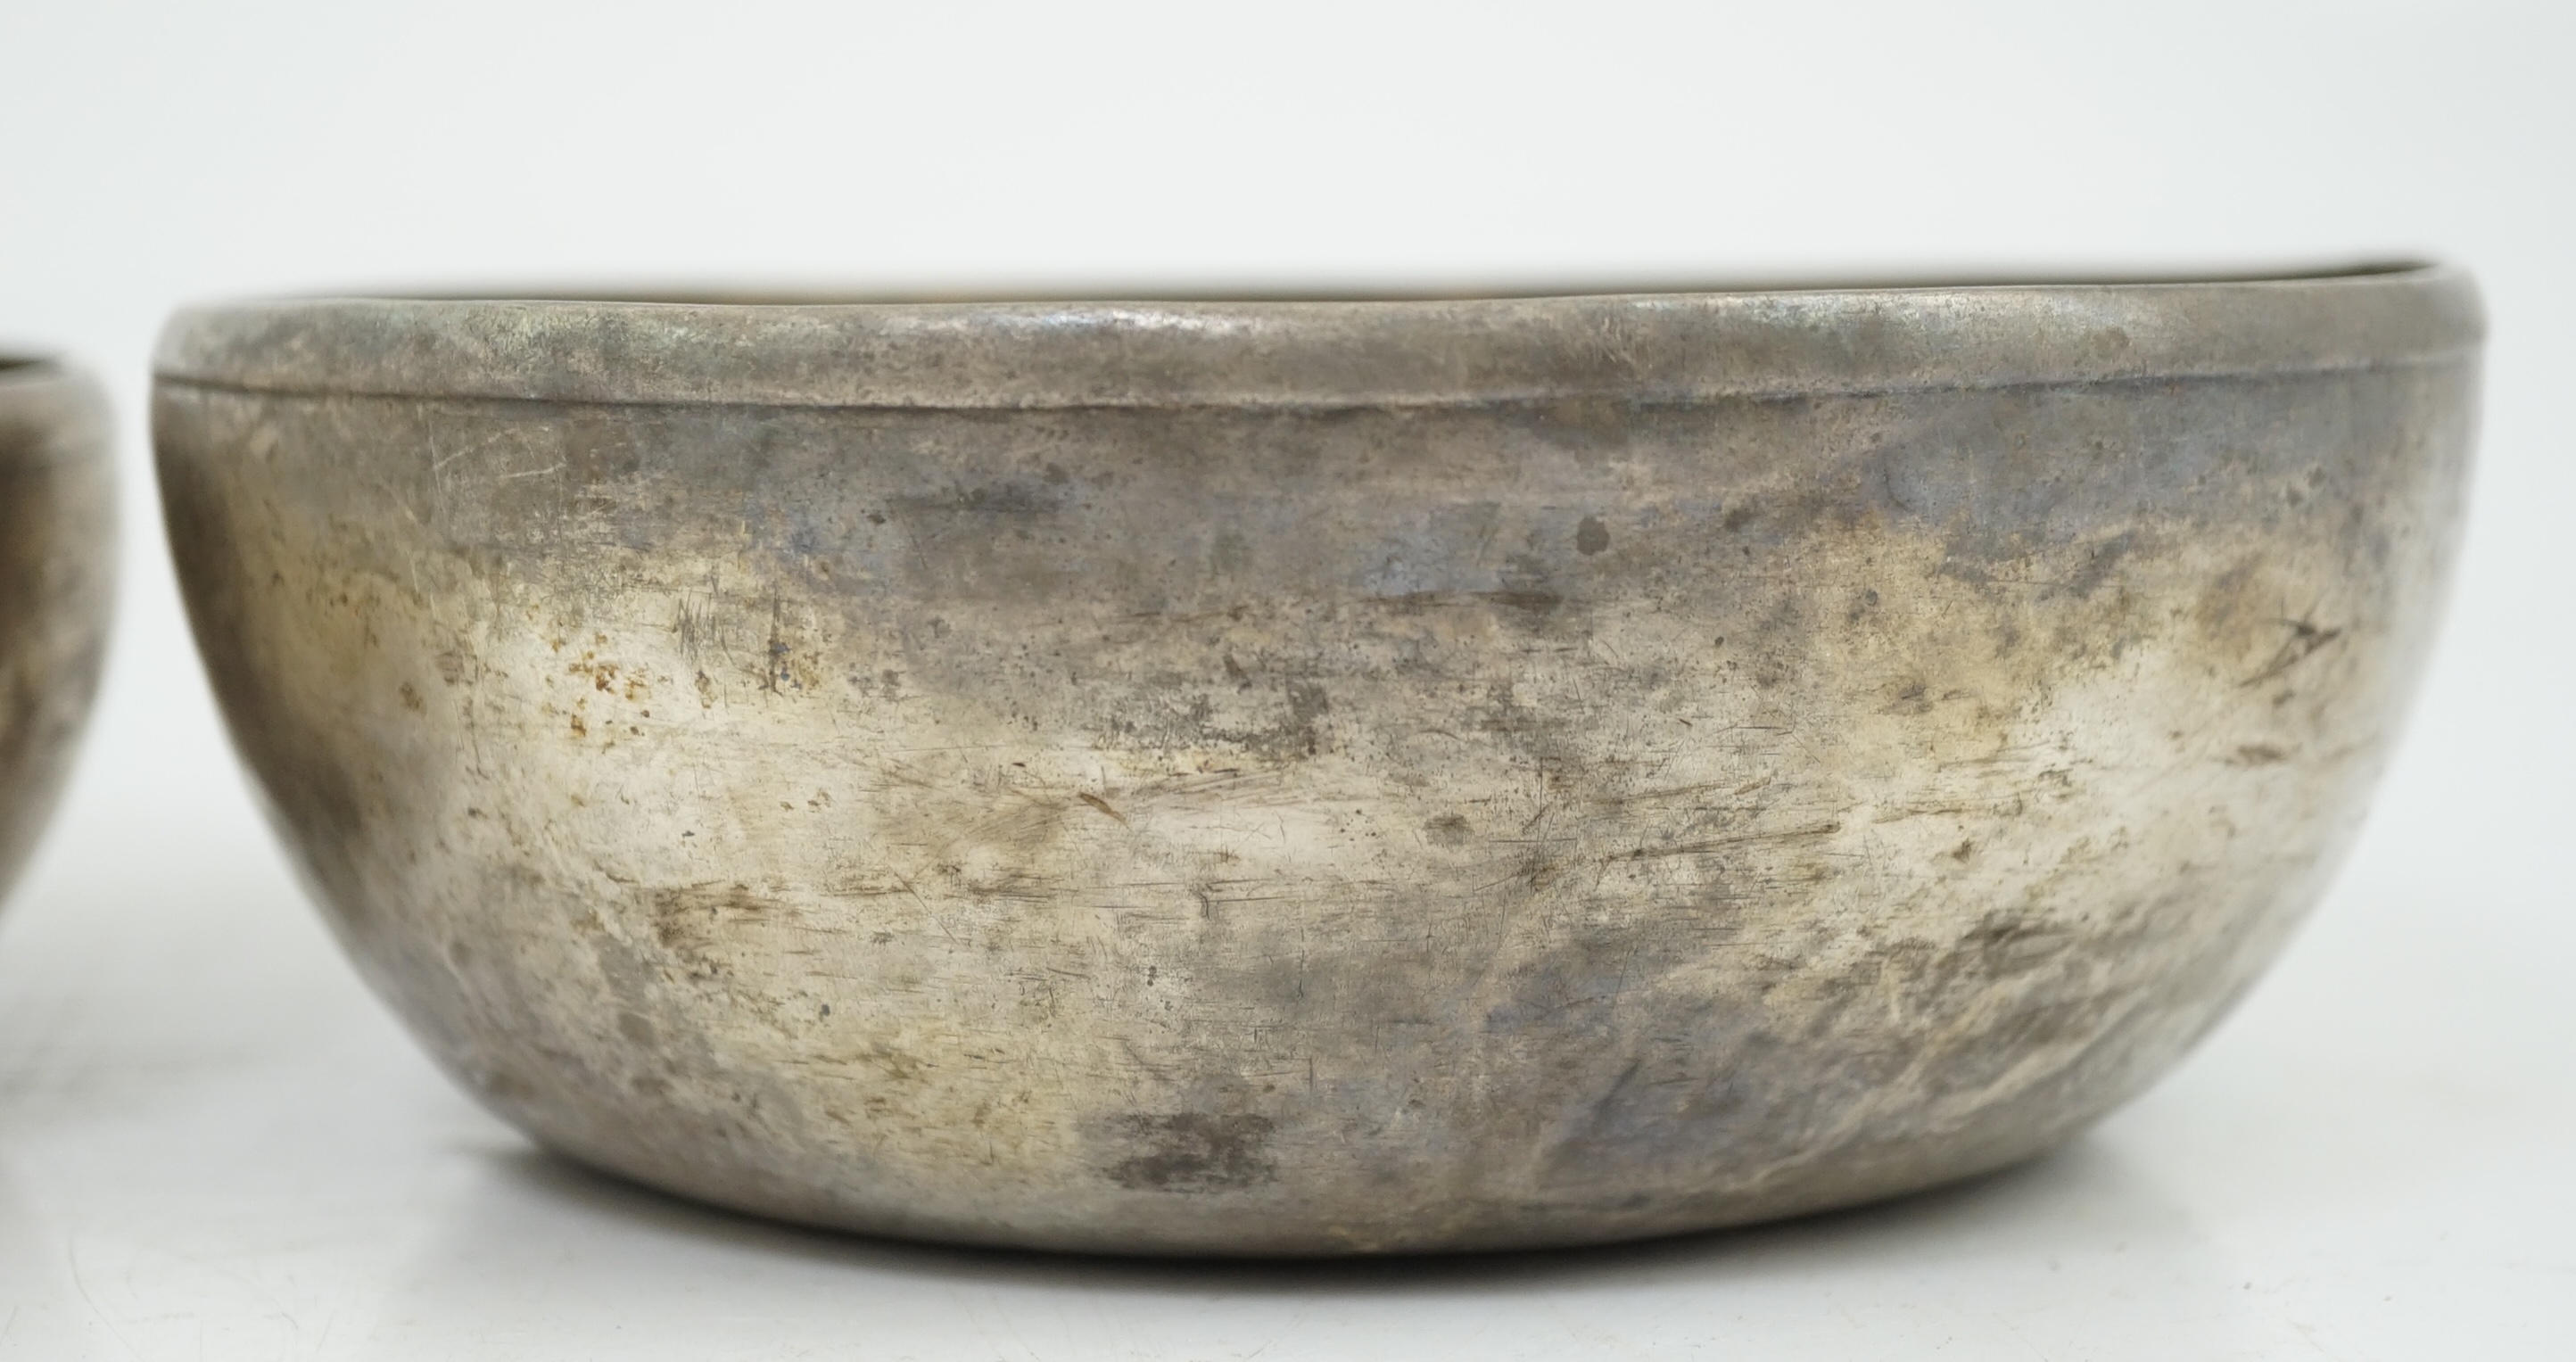 Two silver bowls, Roman or Gandhara, c. late 1st century BC - early 1st century A.D